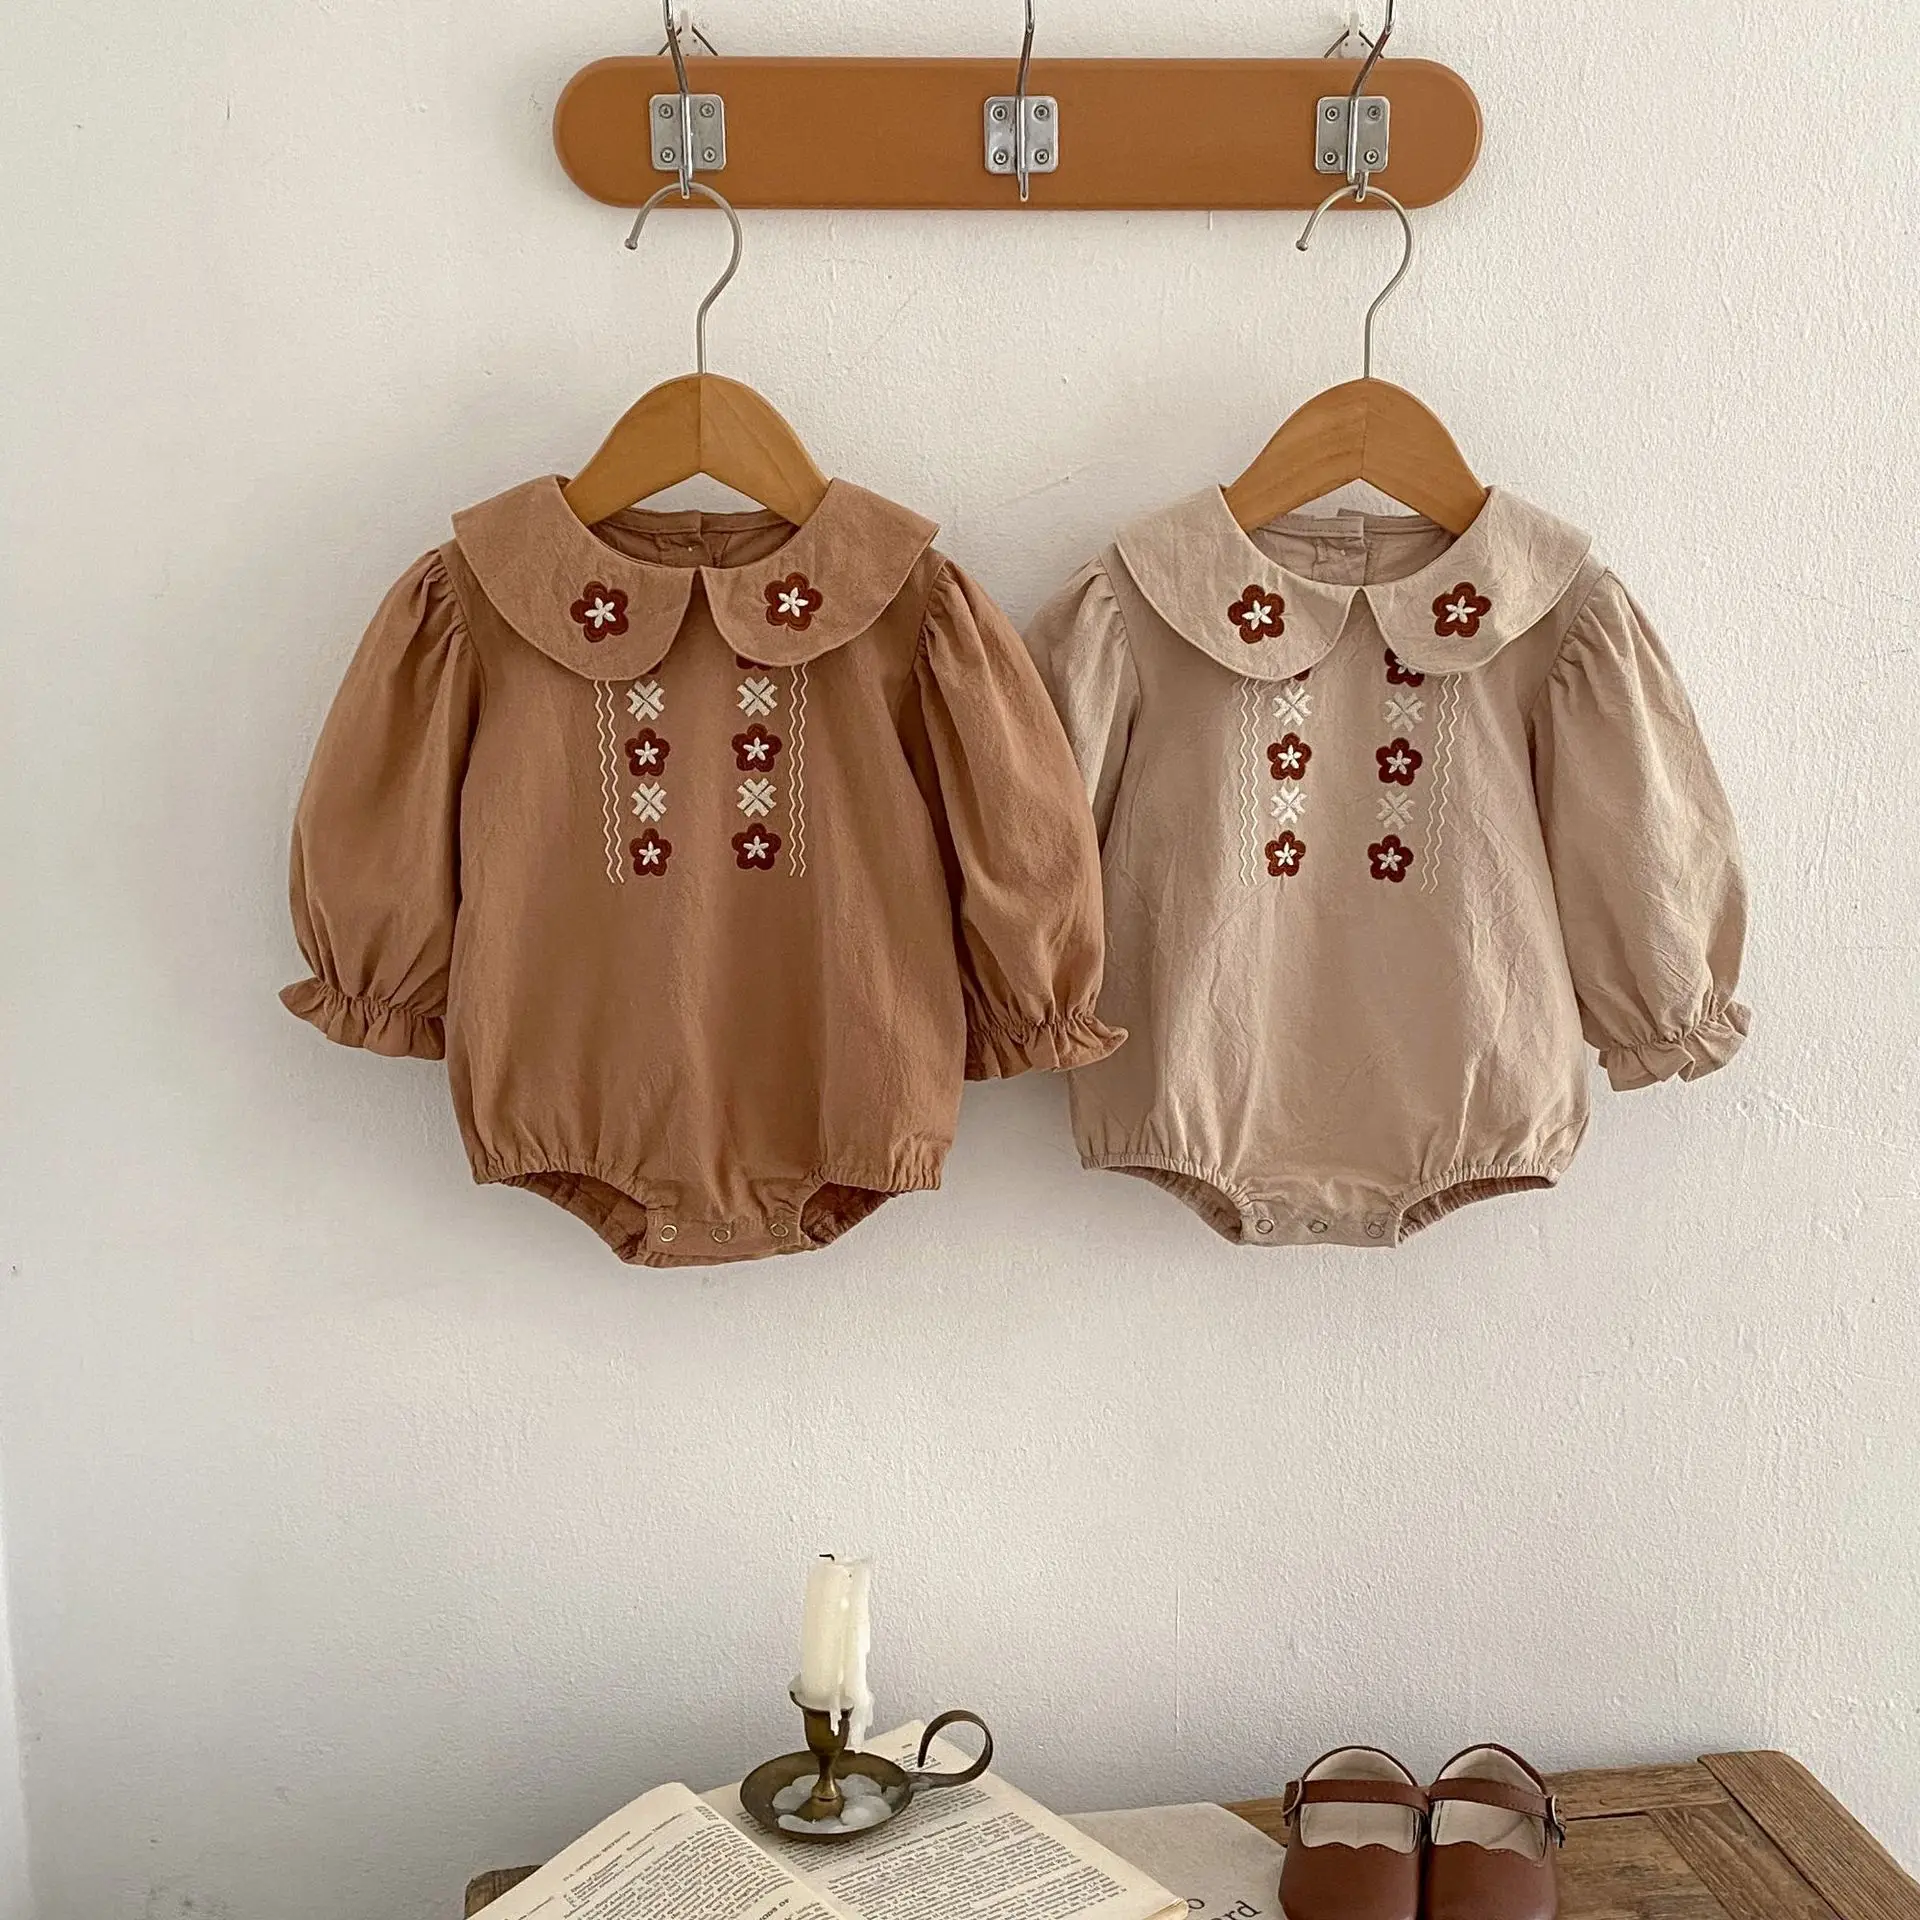 

Newborn Baby Girl Vintage Cotton Romper Embroidery Infant Toddler Longsleeve Jumpsuit Onepiece Outfit Spring Baby Clothes 3-18M